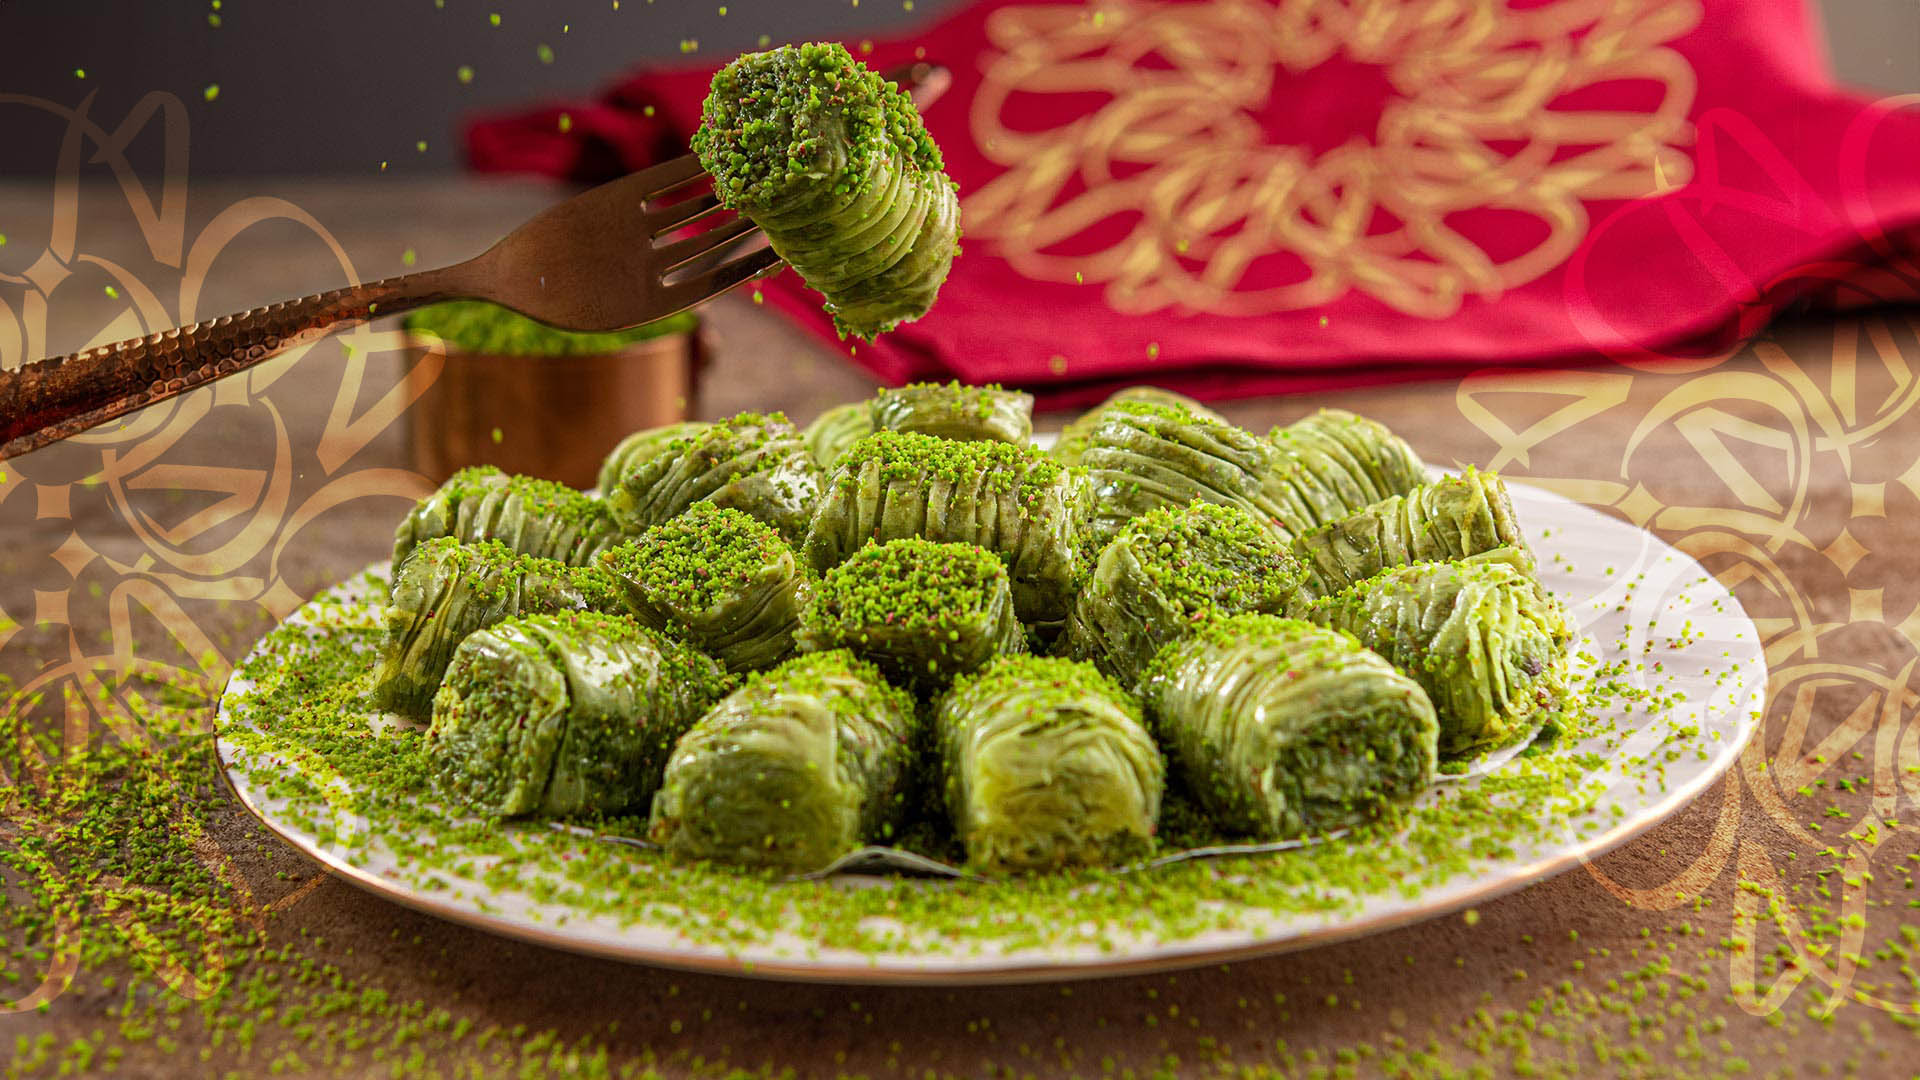 Magic on Your Palate: The Premier Sweets Shop for Turkish Sweets​